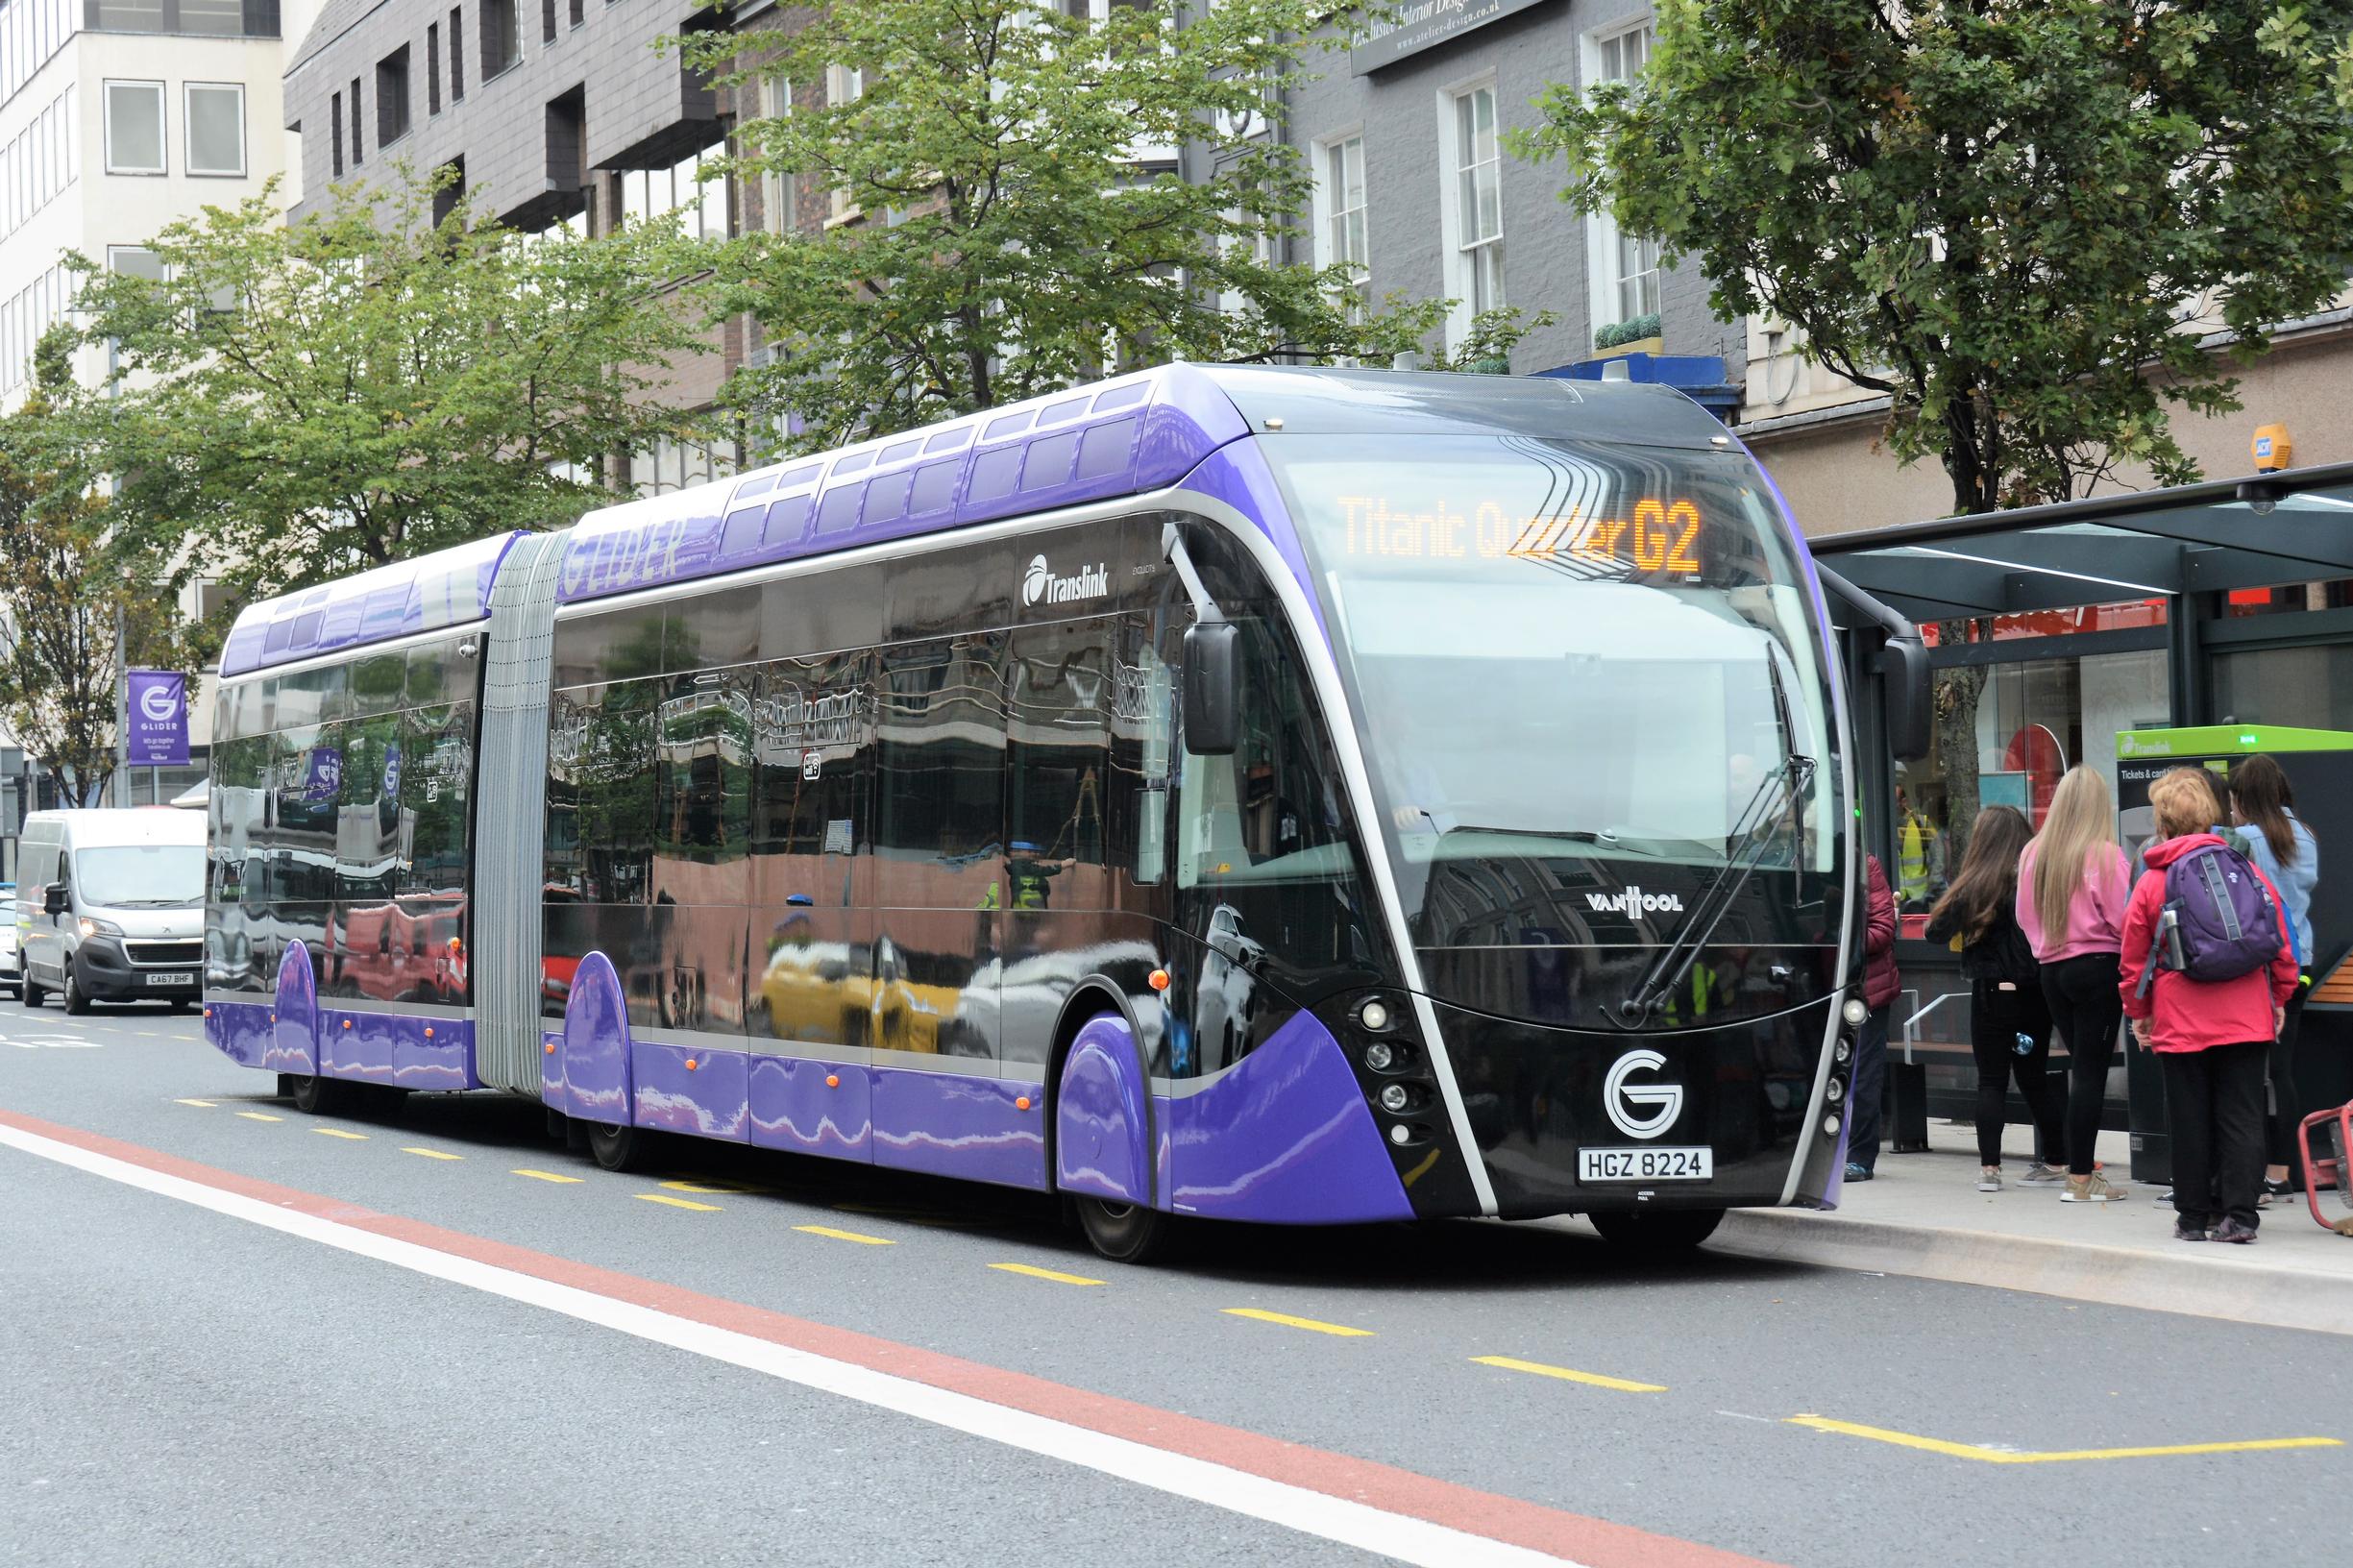 The Belfast Rapid Transit (BRT) Glider service resulted in pre-pandemic passenger growth of around 70% on the BRT corridors